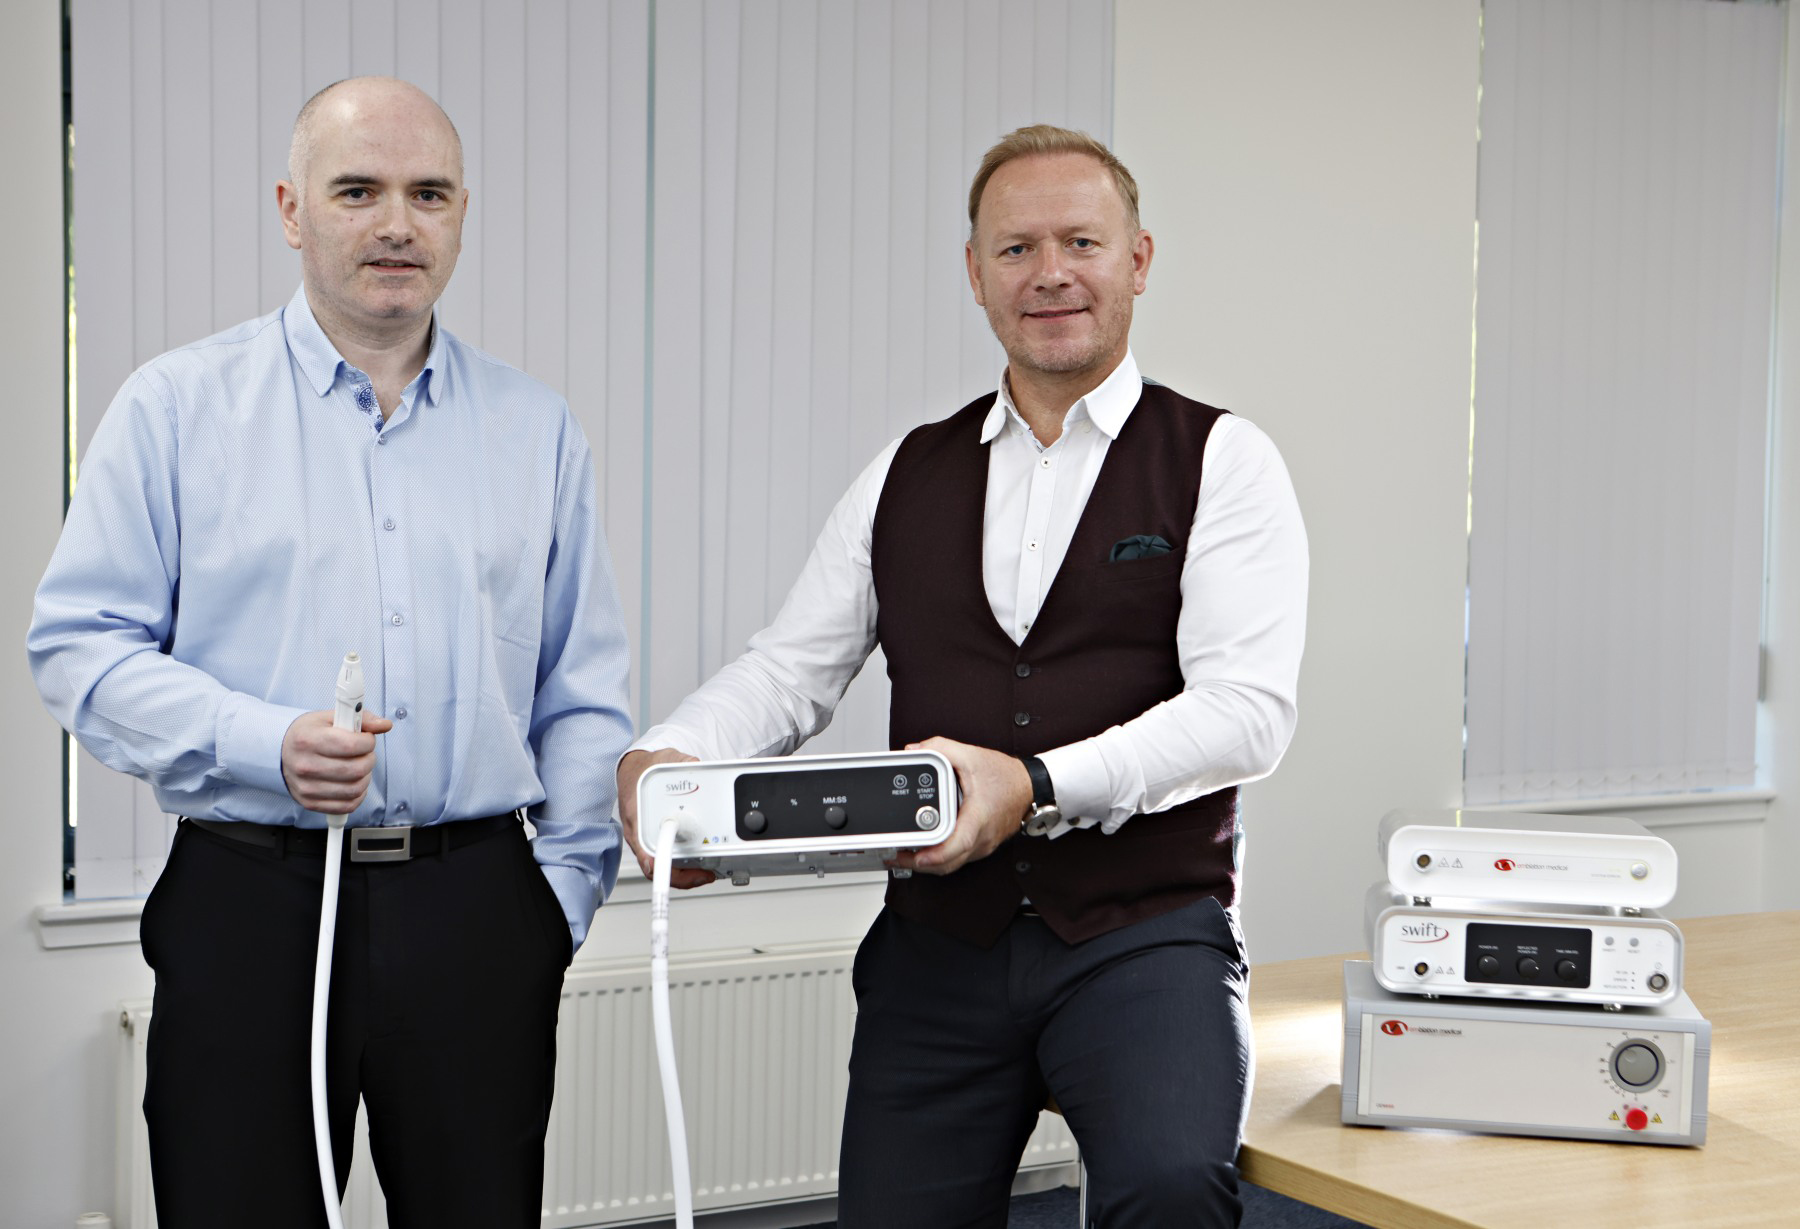 Emblation secures partnership deal with German medical device firm